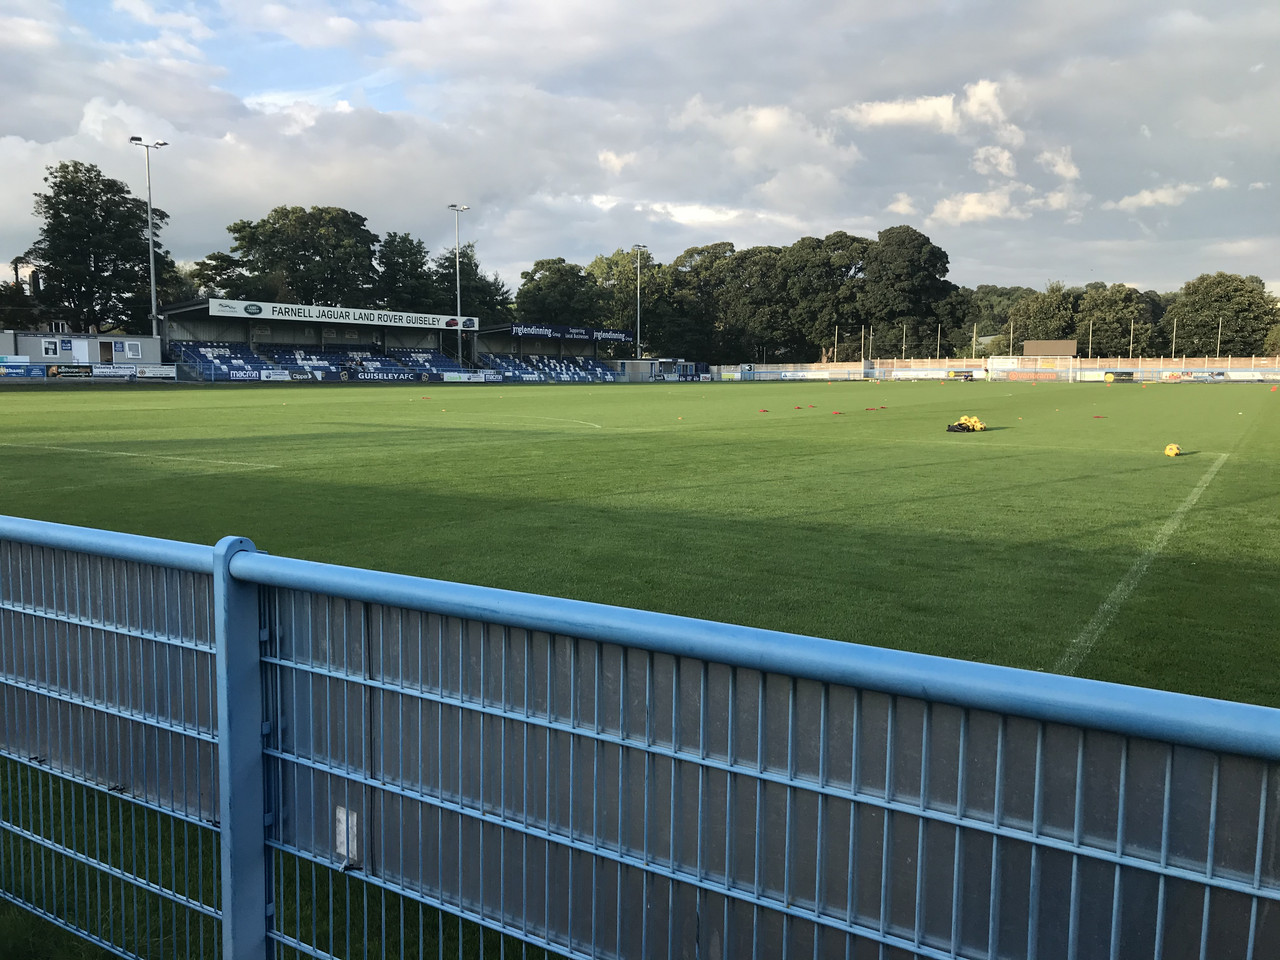 Guiseley AFC VS Gateshead FC: Match Preview